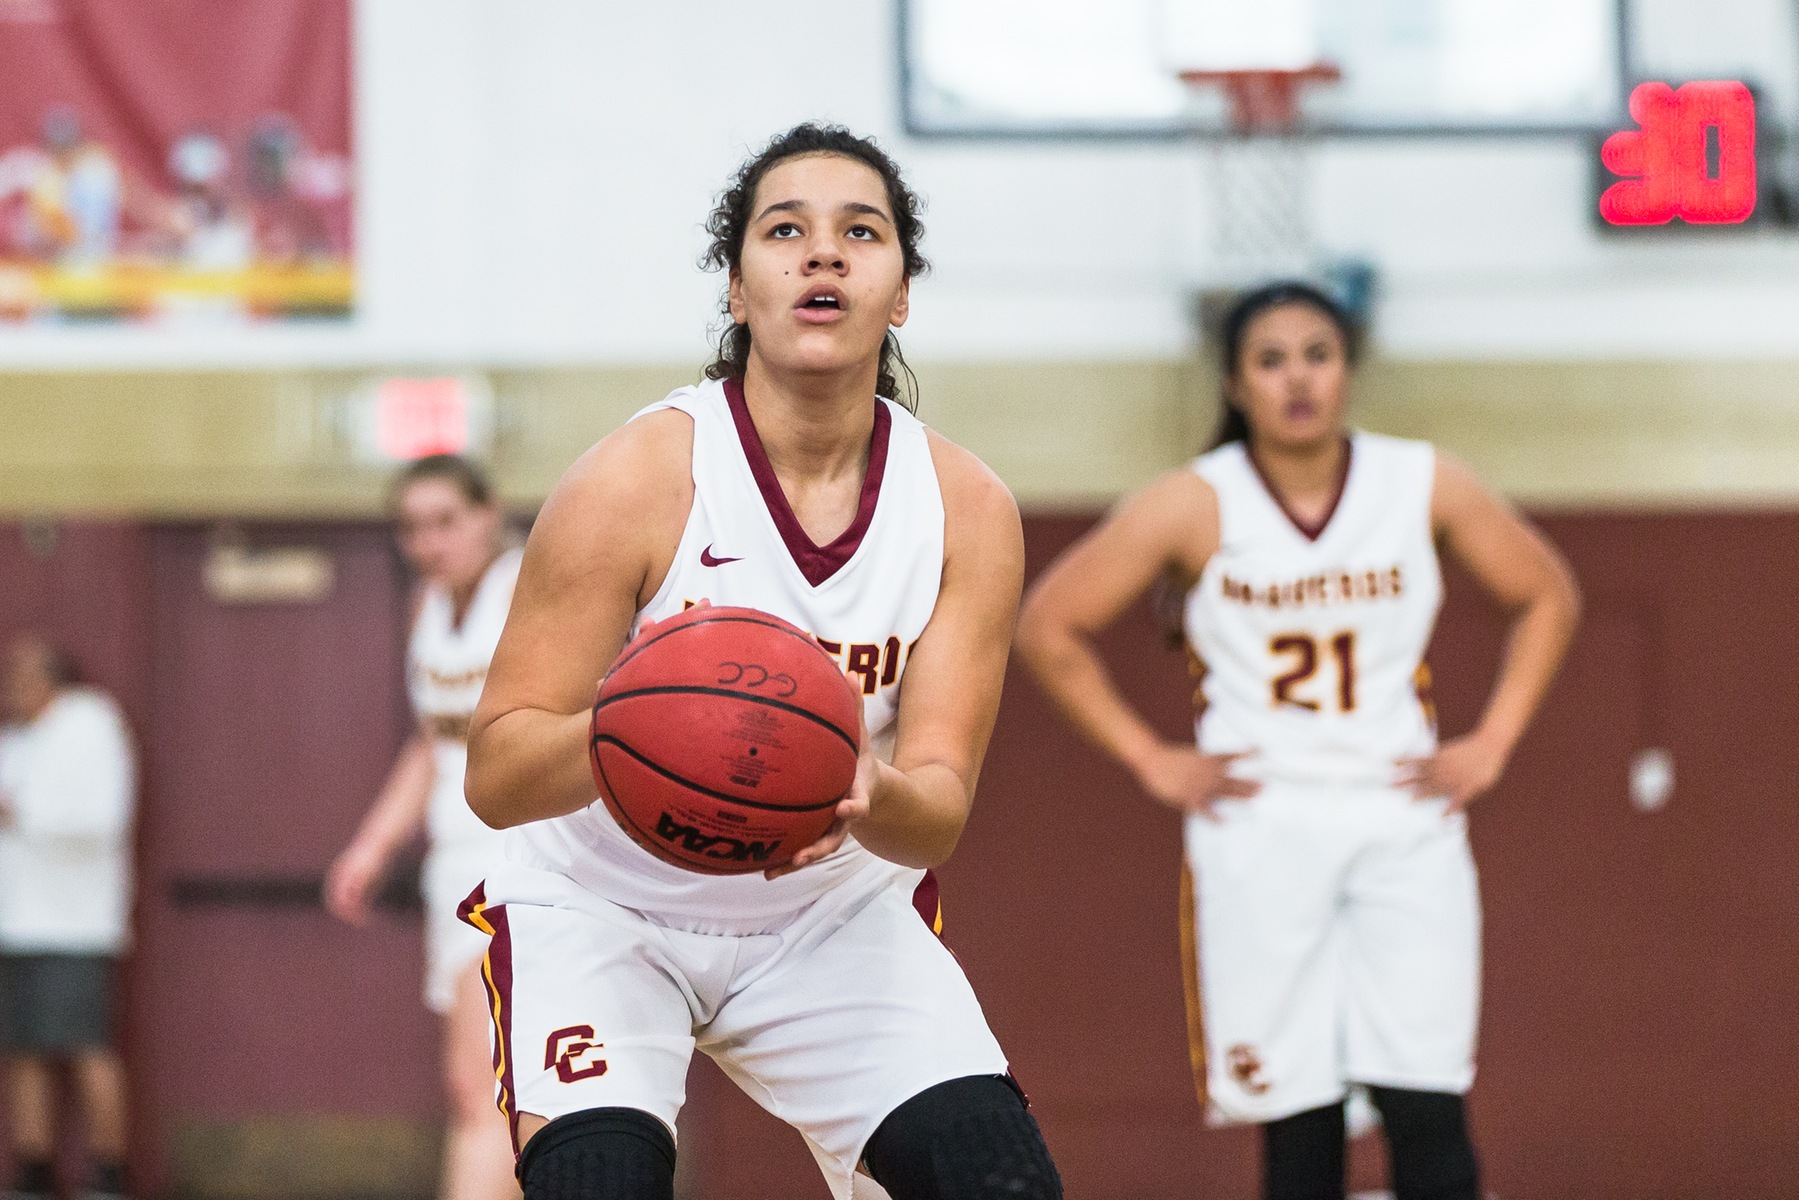 Jankuvloski leads Lady Vaqs to win over Oxnard with 18 points